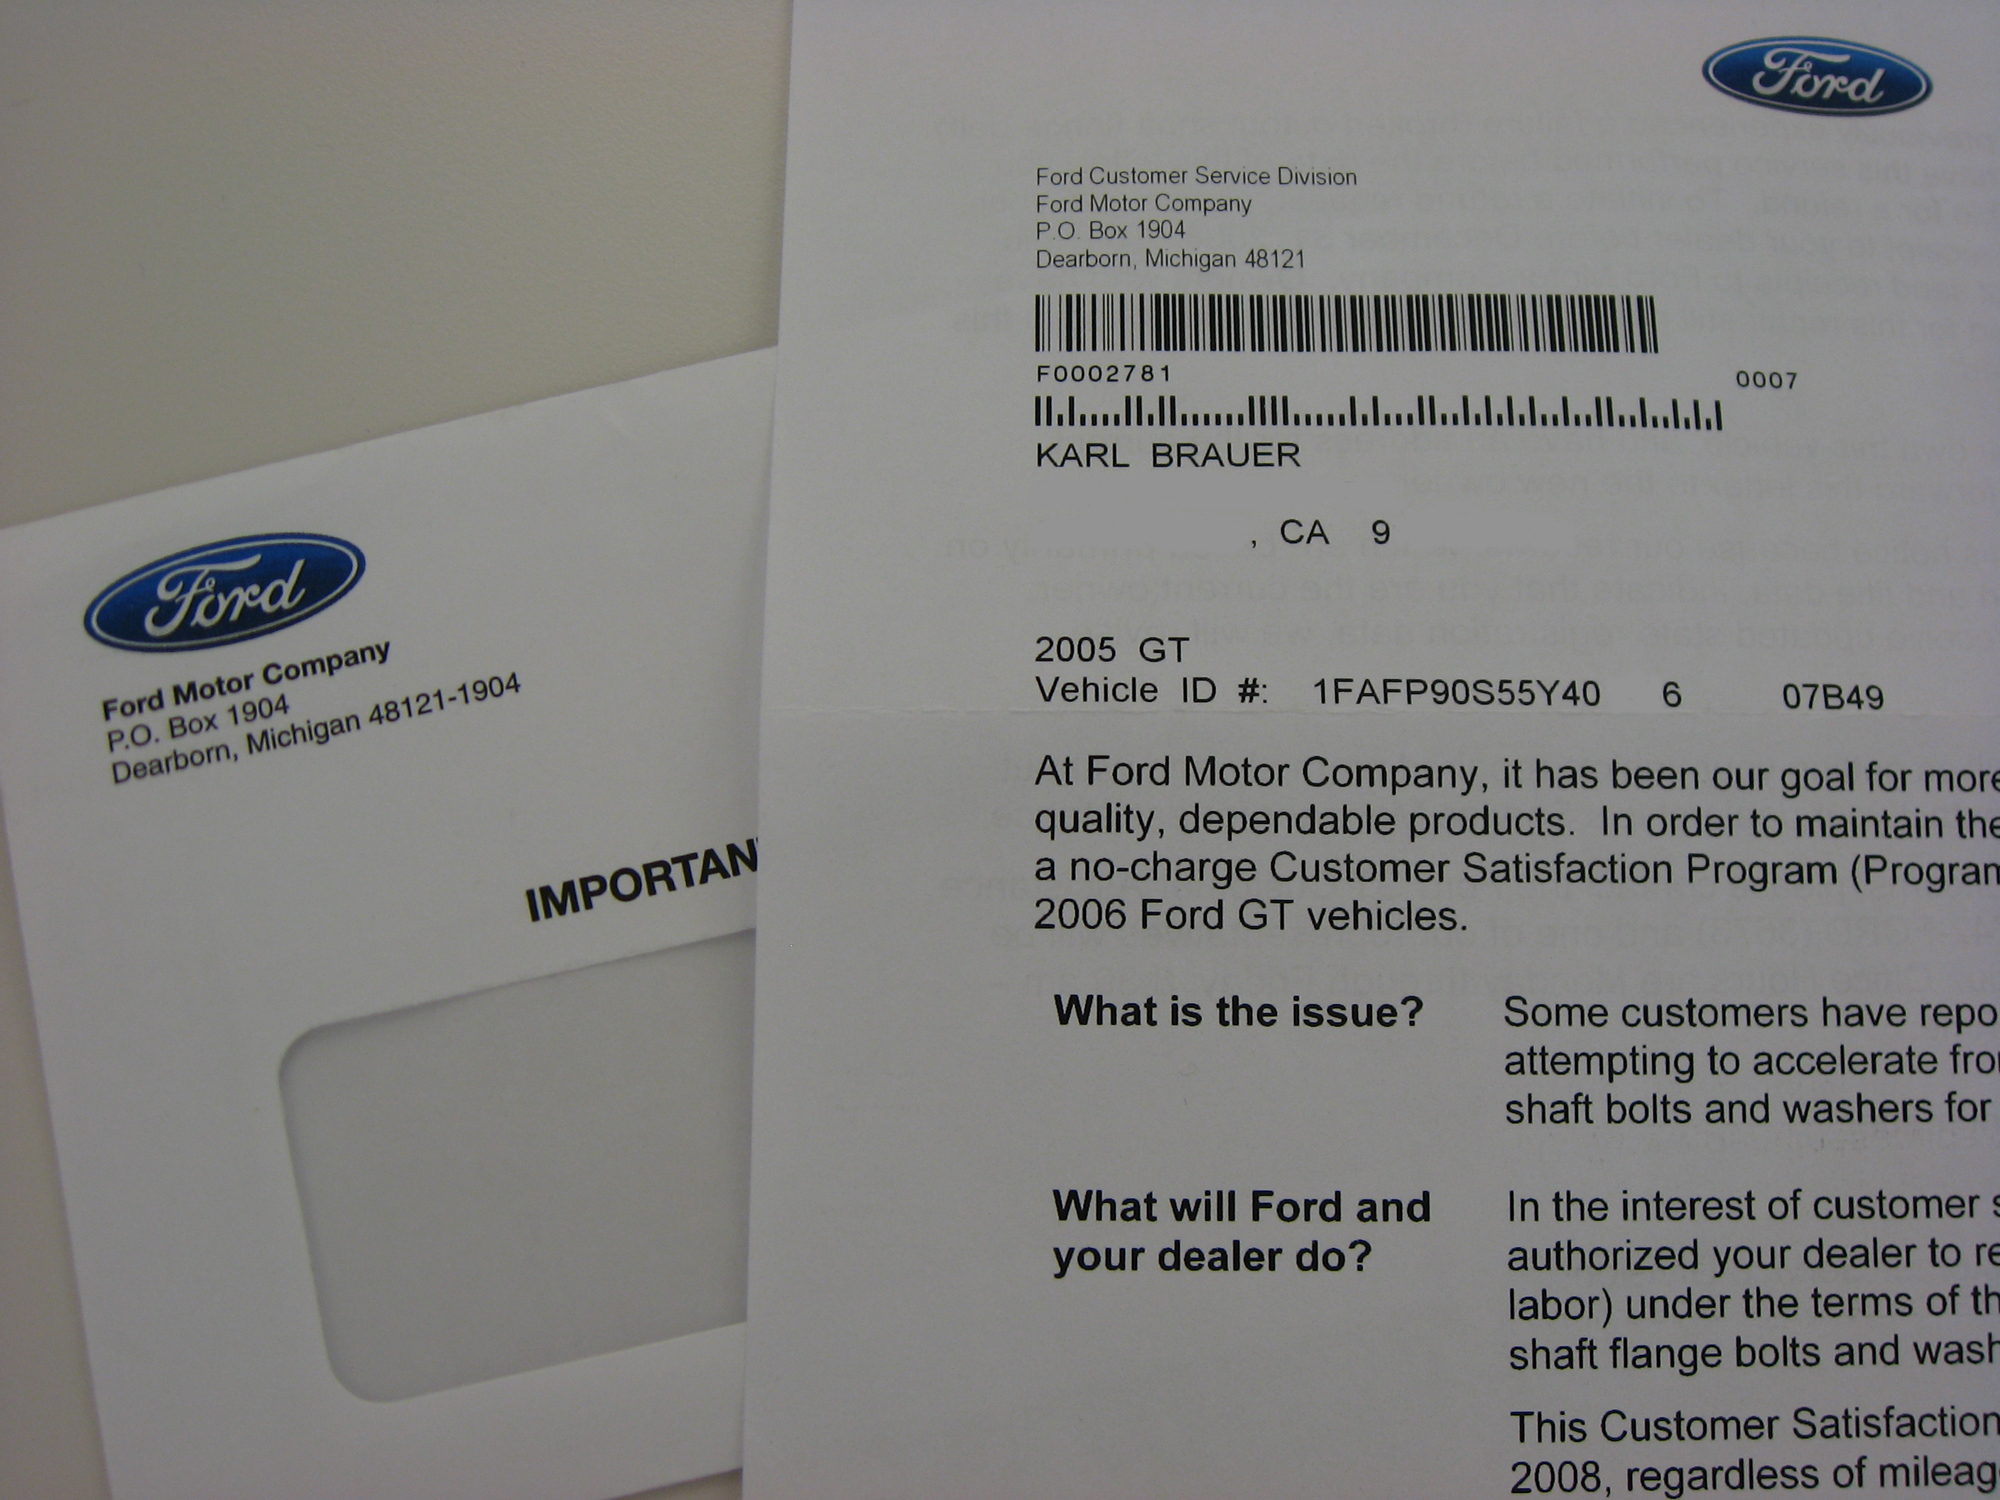 2005 Ford GT Long Term Axle Bolt Recall Notice